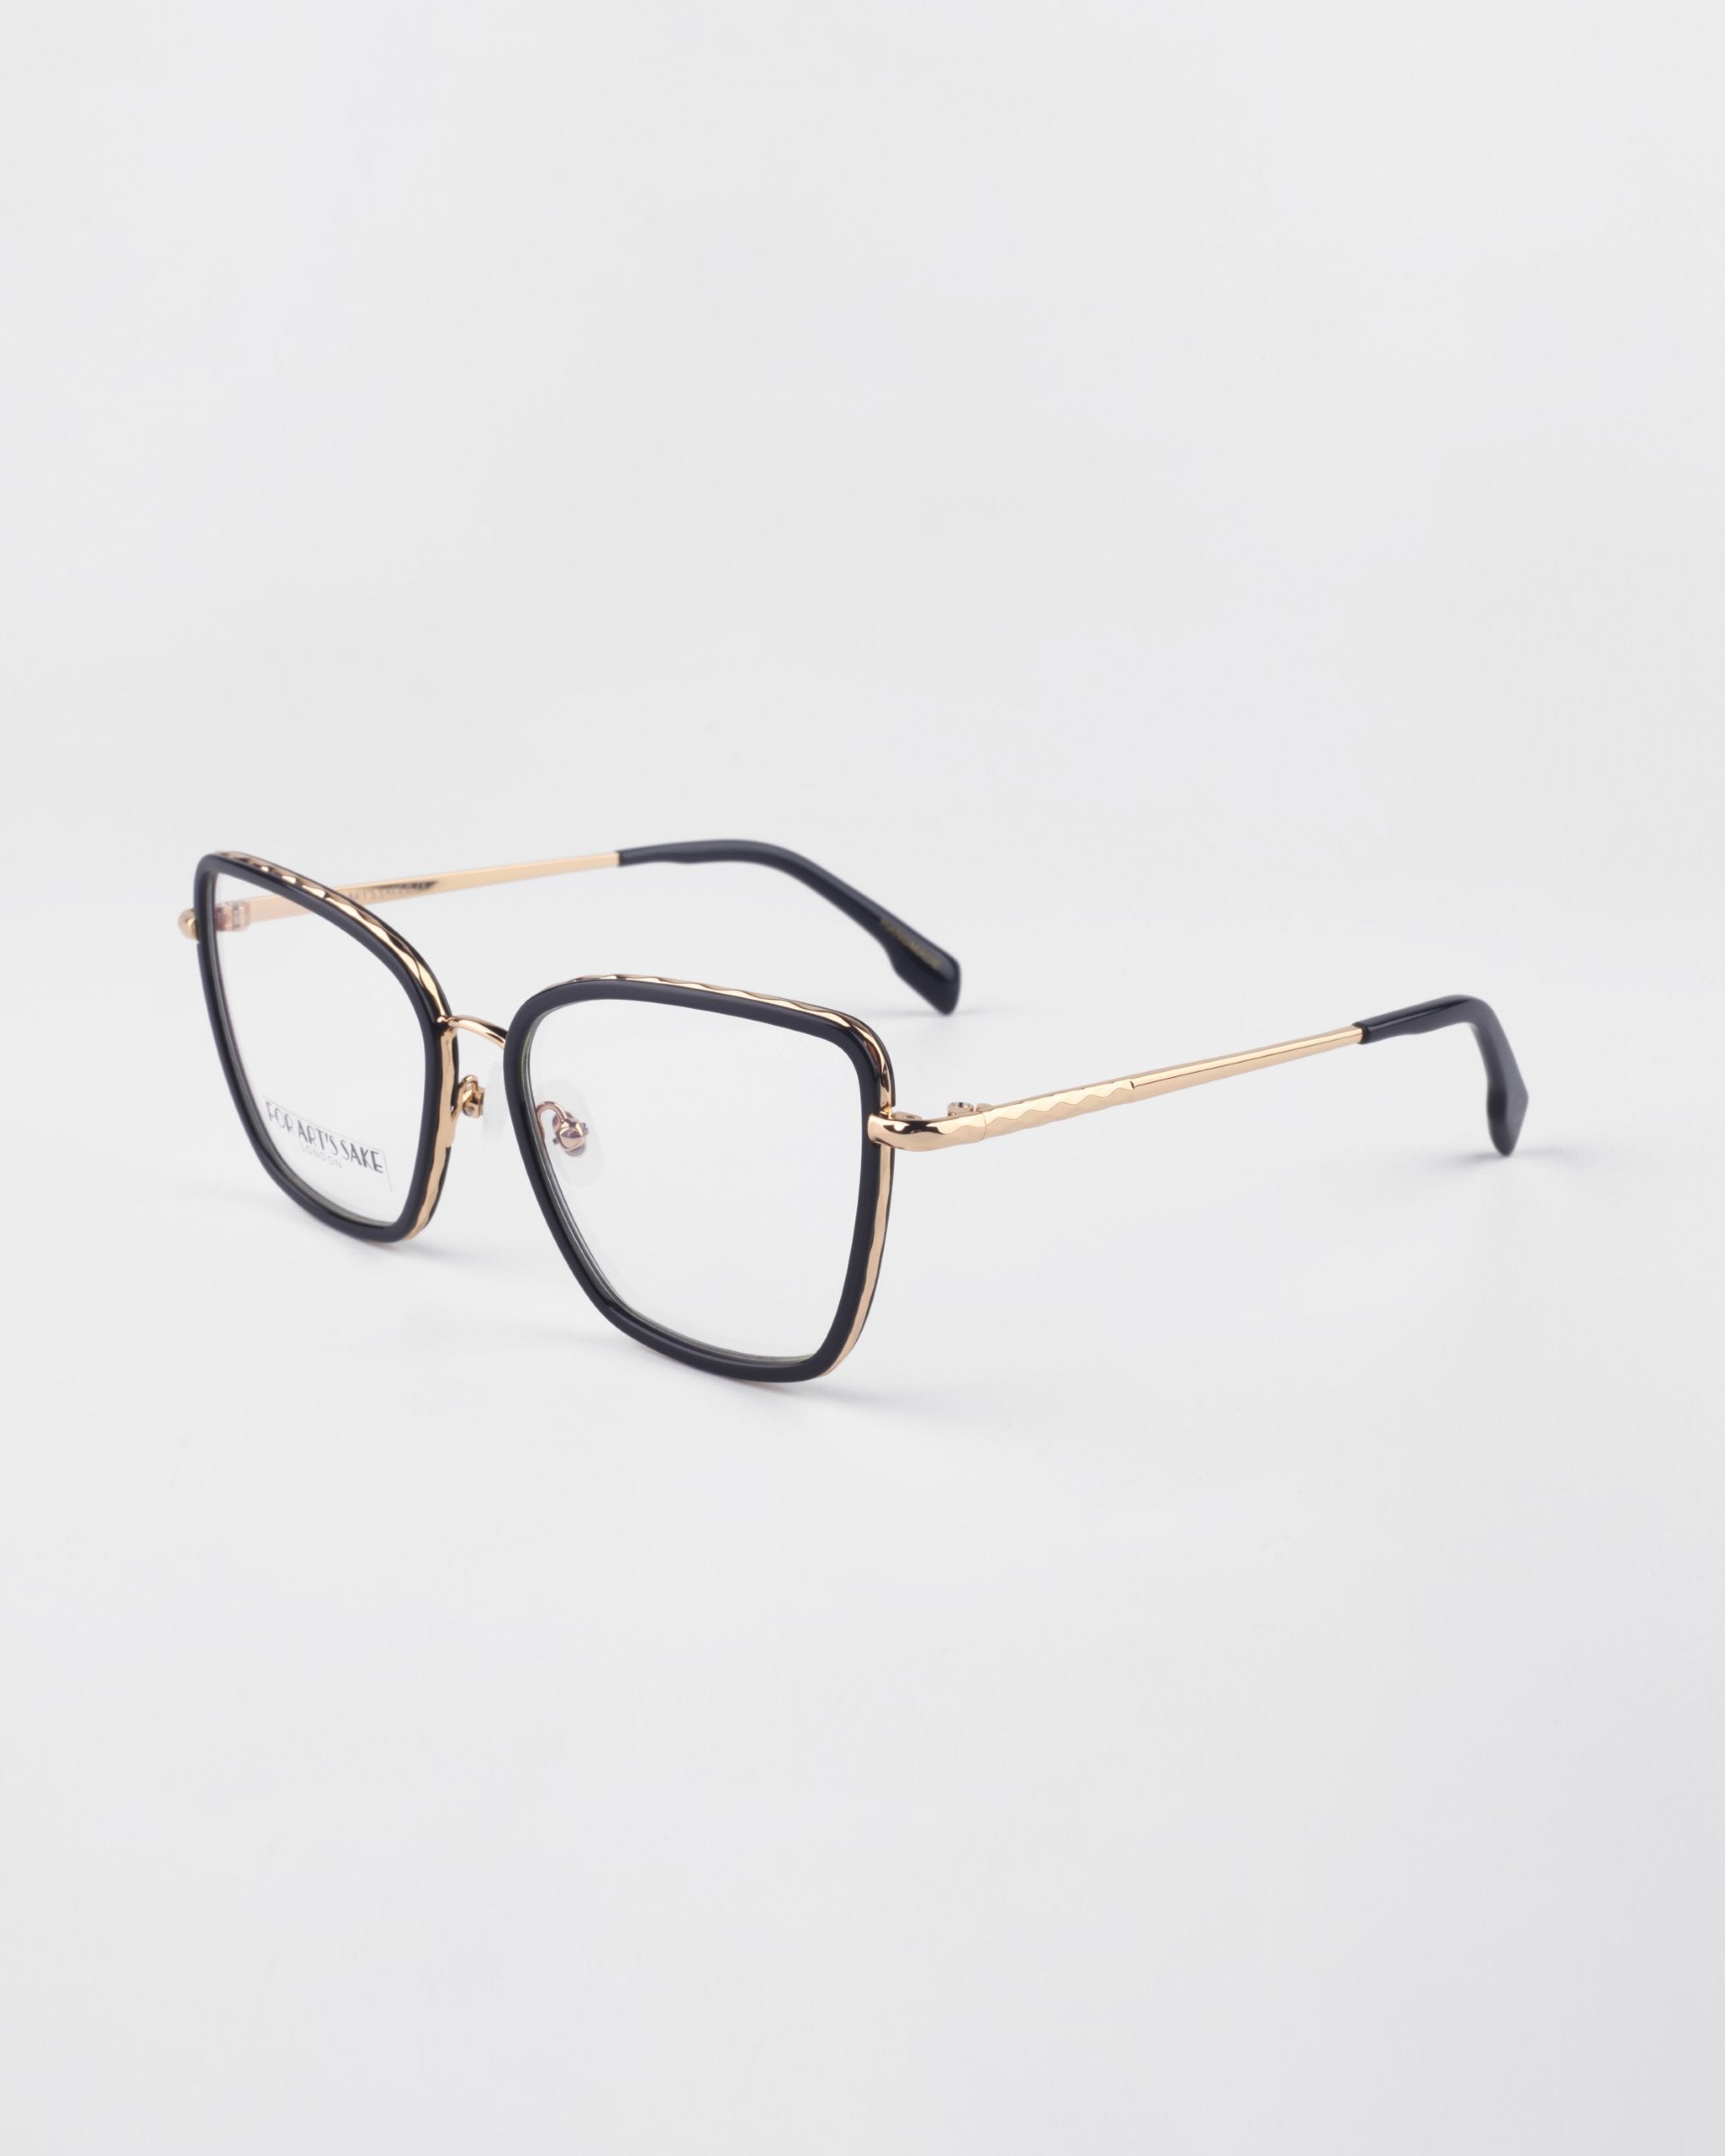 A pair of Lace eyeglasses by For Art&#39;s Sake® with a sleek black frame and 18-karat gold-plated arms. The glasses, featuring prescription lenses, rest on a white background, angled to show both the front and side views of the stylish frame.